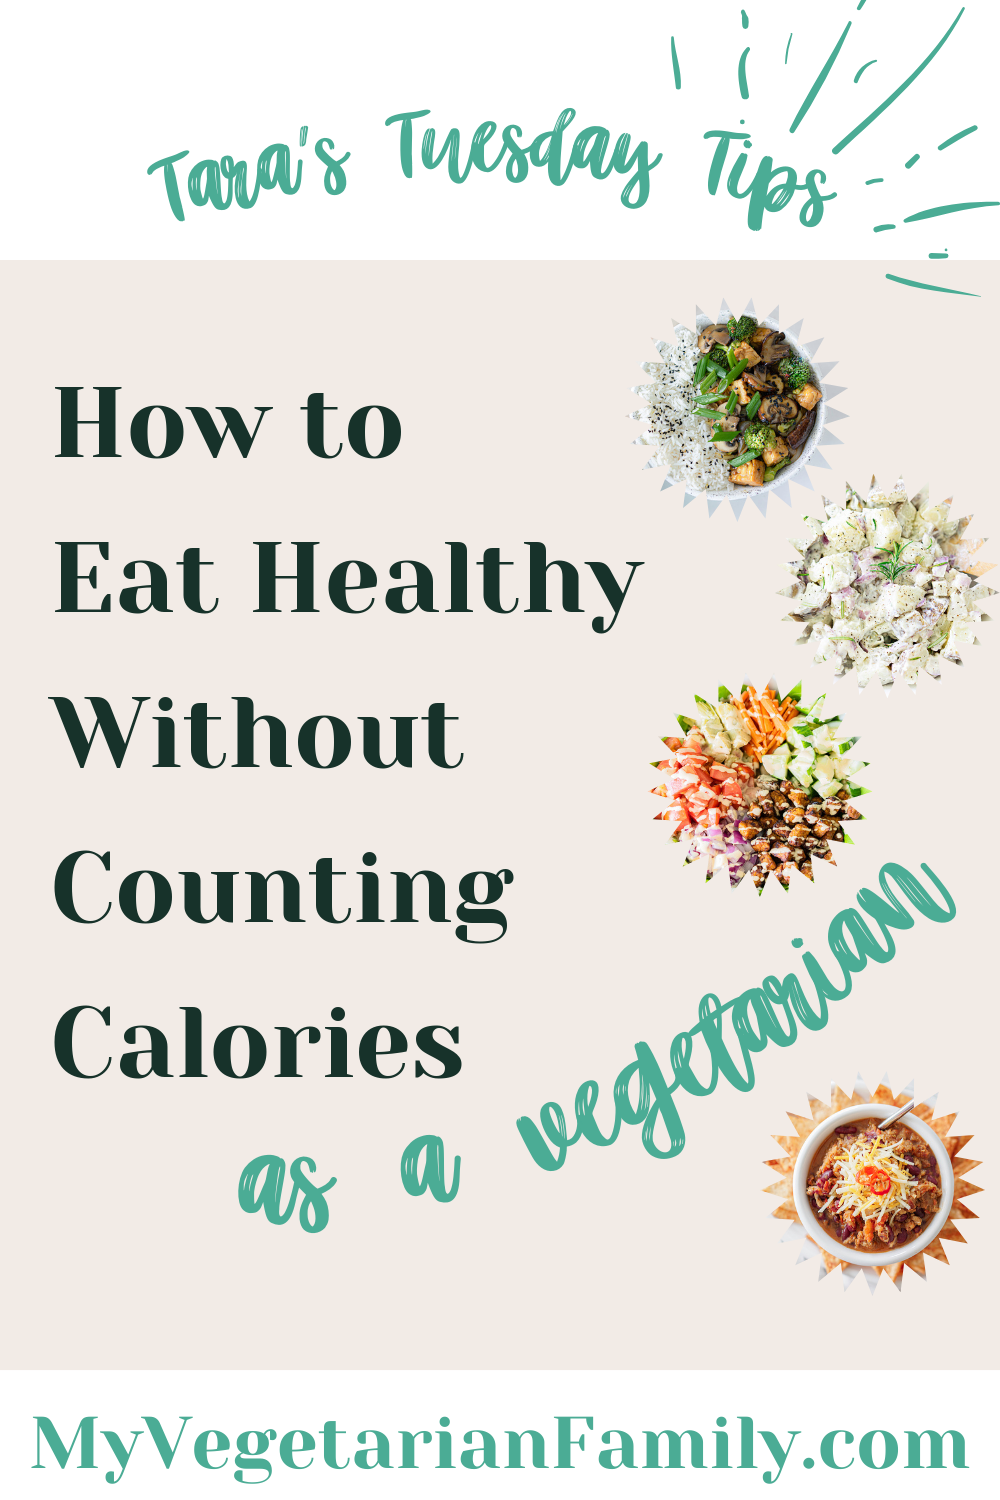 How to Eat Healthy Without Counting Calories | My Vegetarian Family #stopcountingcalories #tarastuesdaytips